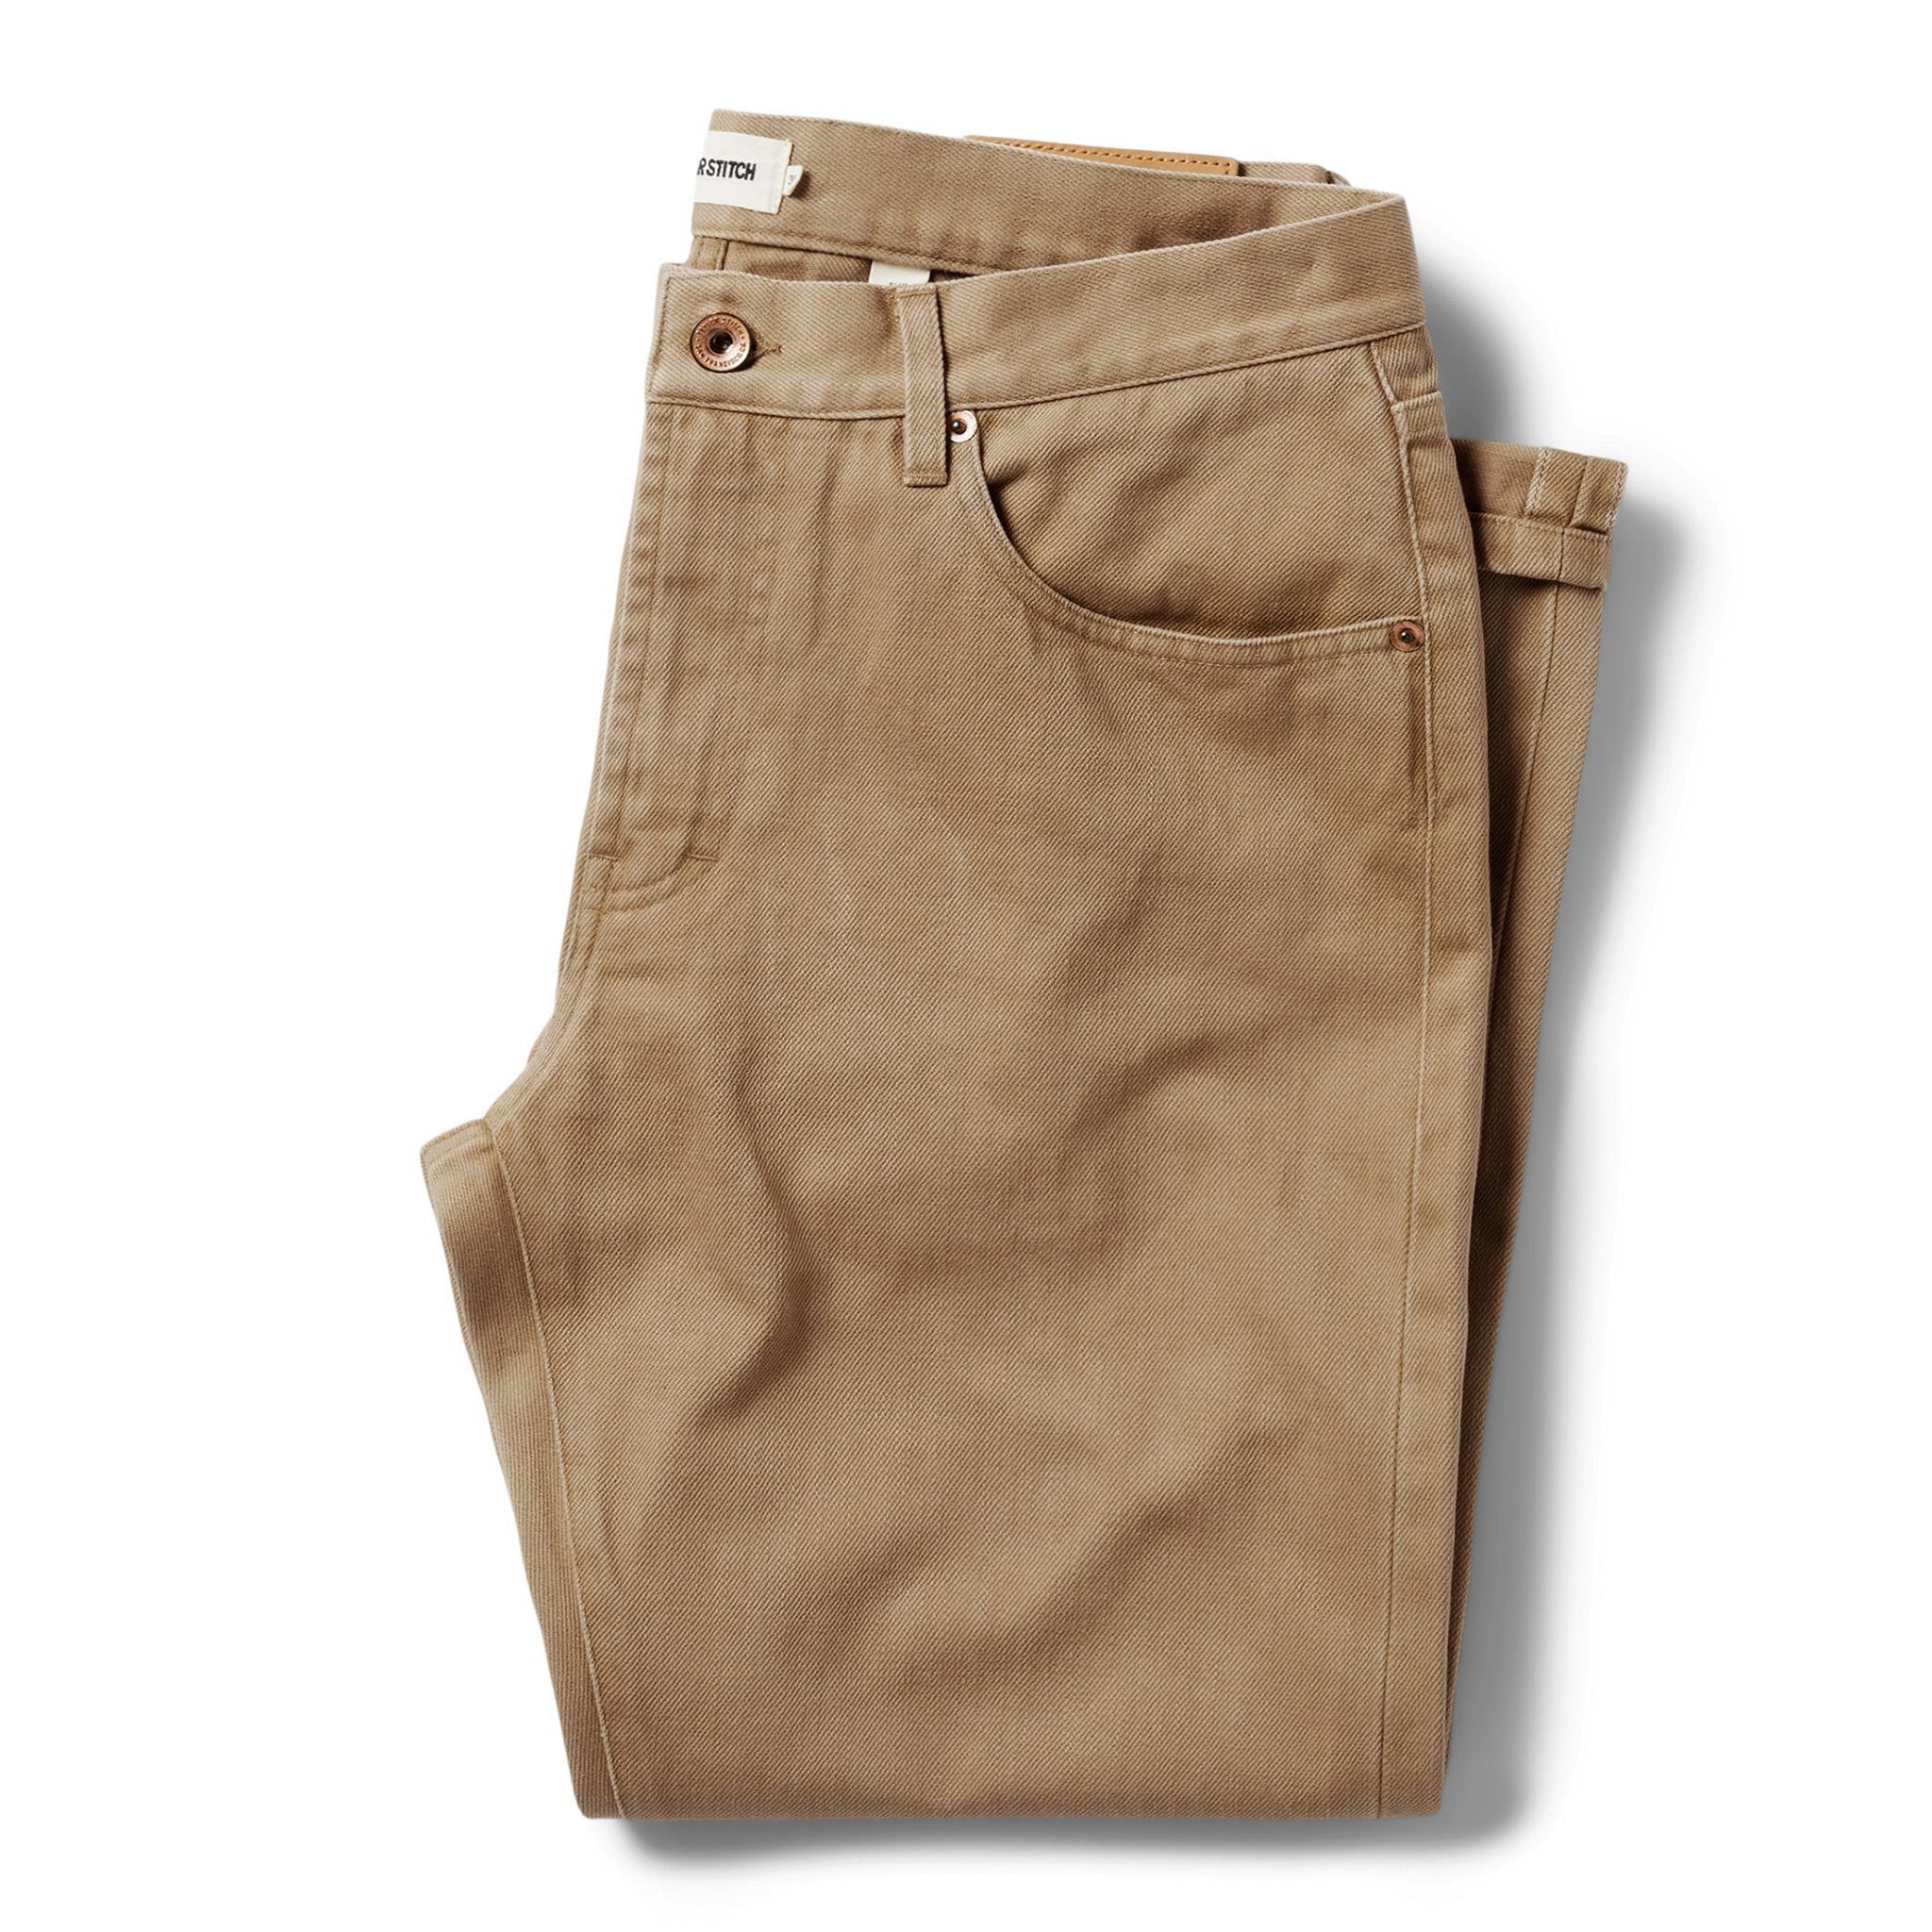 The Slim All Day Pant in Washed Tobacco Selvage | The Denim Shop